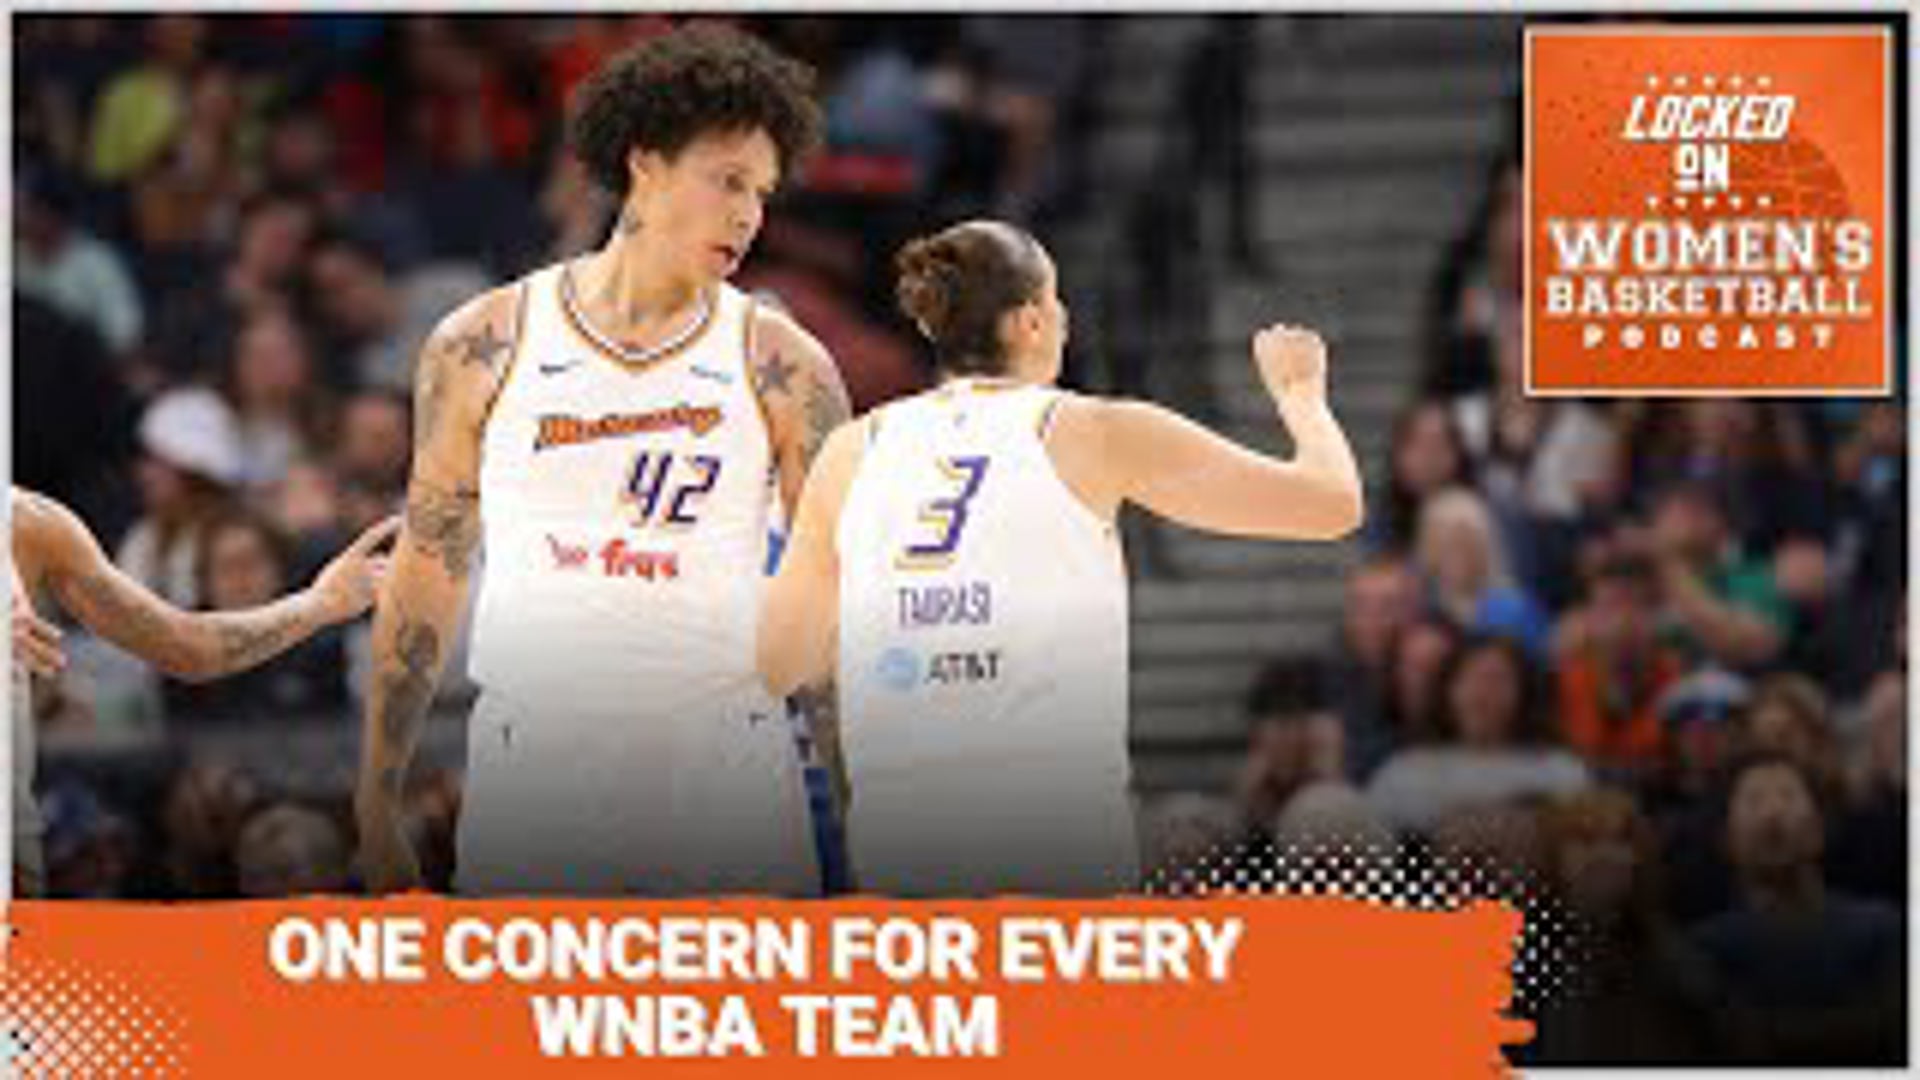 From the Phoenix Mercury’s lack of depth to the Connecticut Sun’s shooting issues, host Hunter Cruse is joined by co-hosts Em Adler and Lincoln Shafer give thoughts.